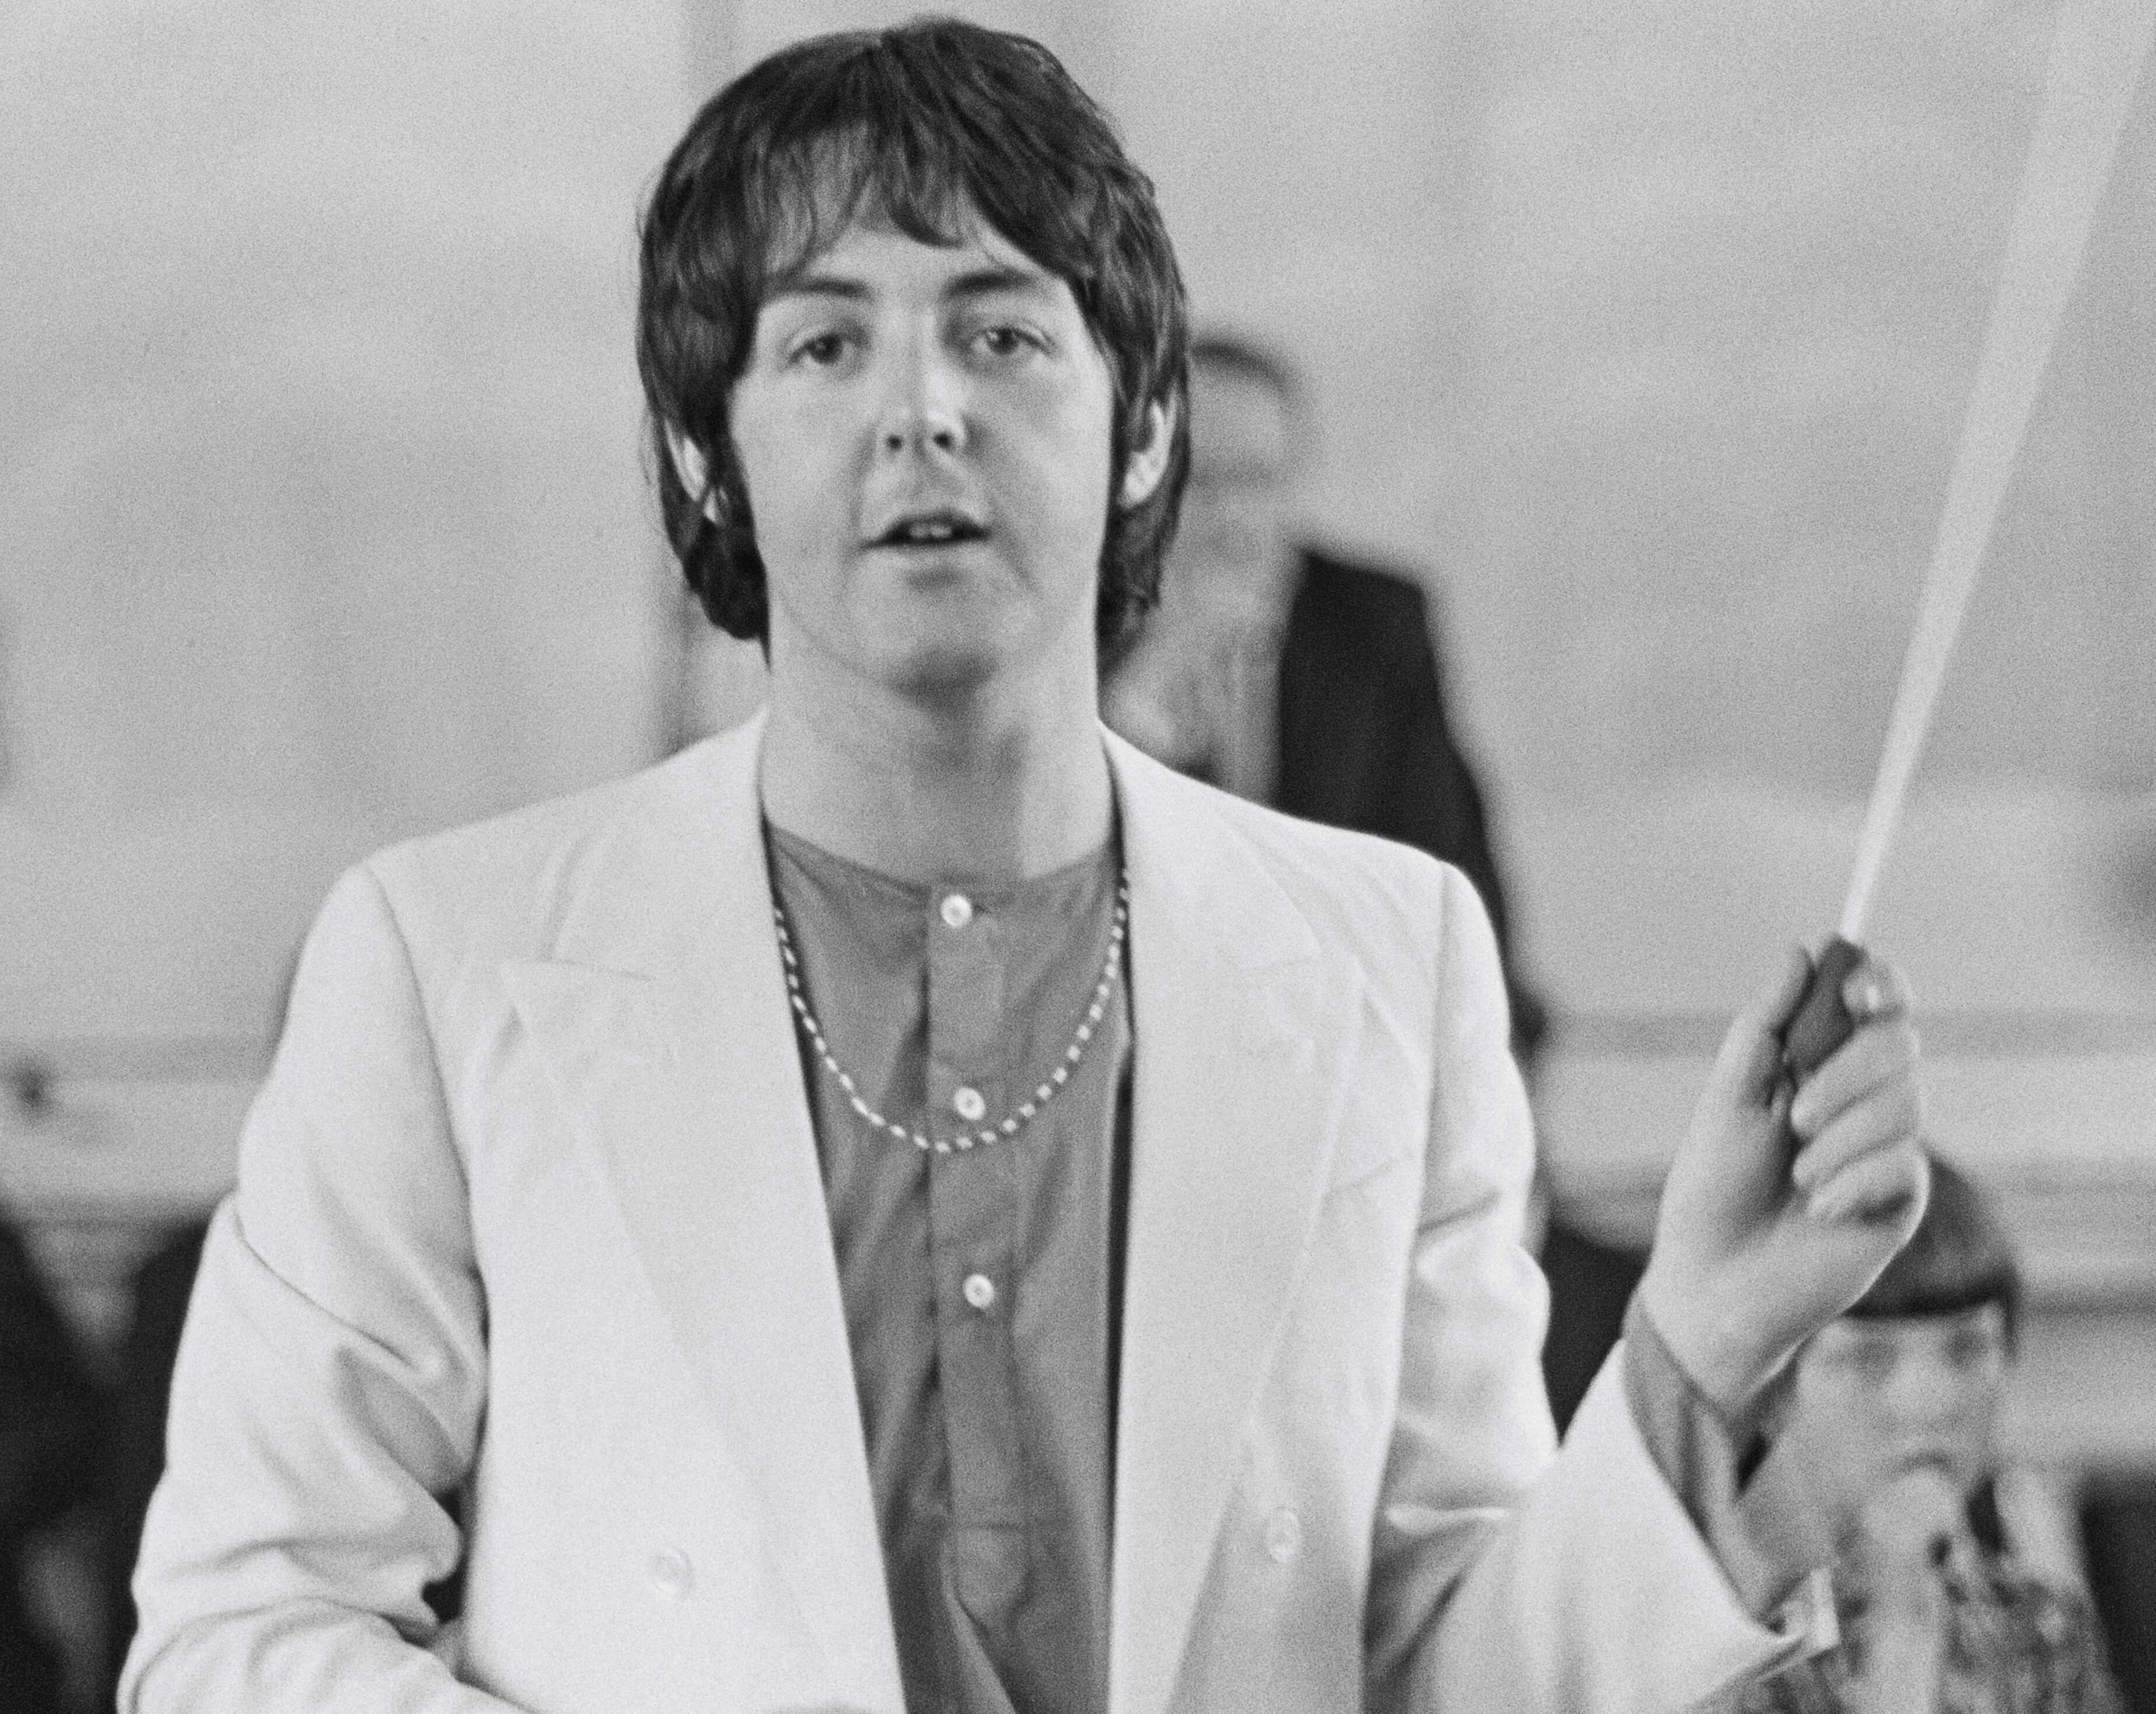 Paul McCartney in a suit during The Beatles' "Revolution" era